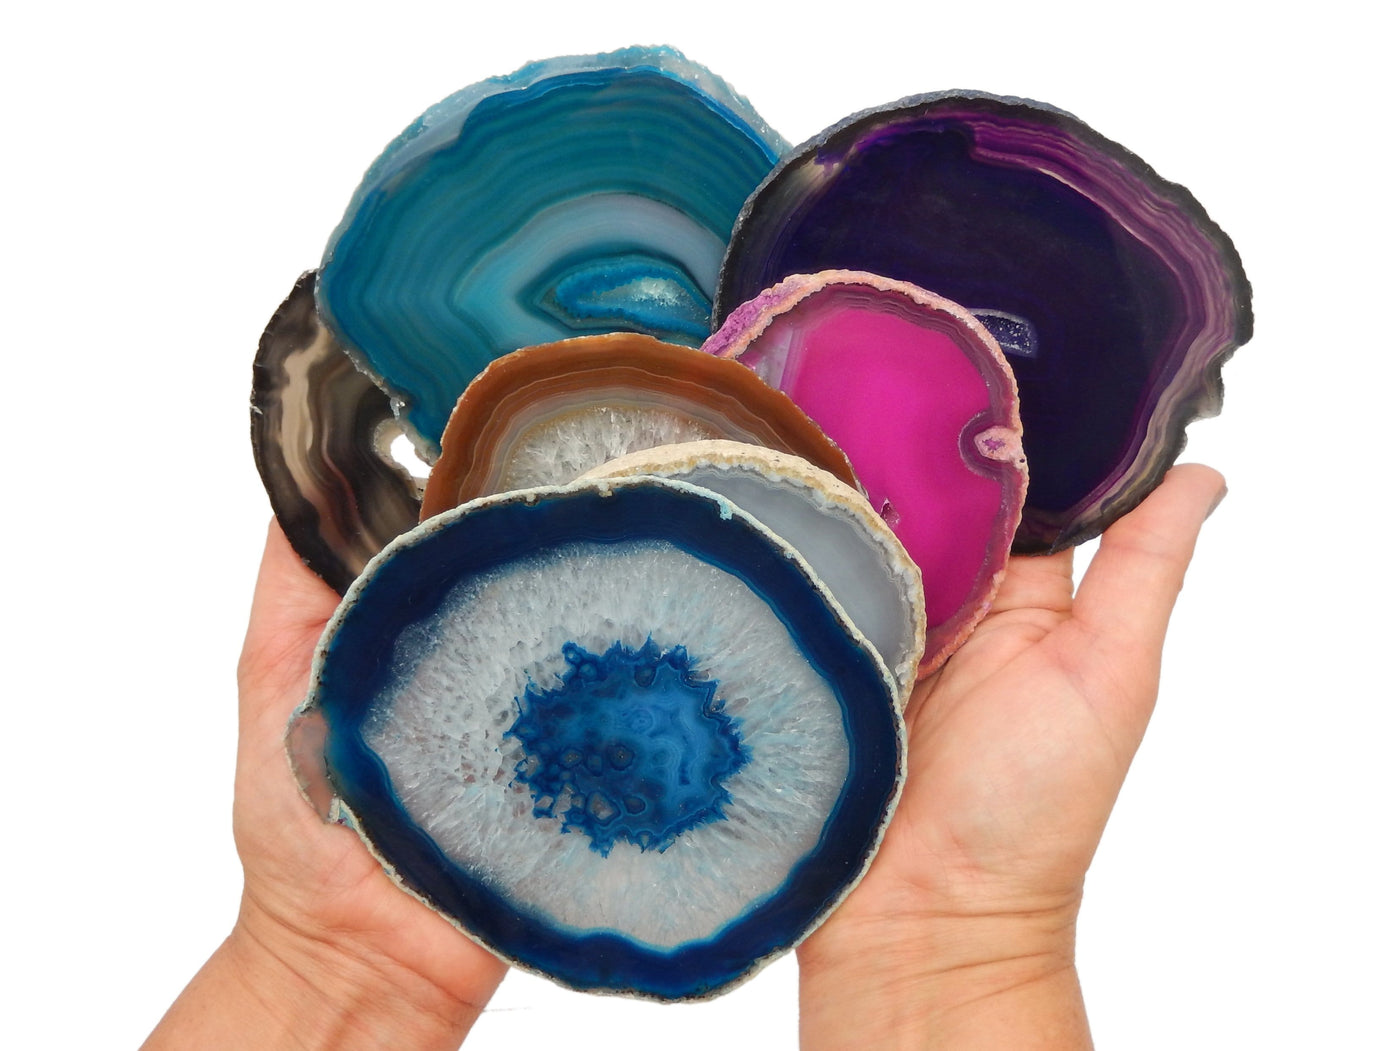 assorted colors of the #5 agate slices that are available in hands to show size